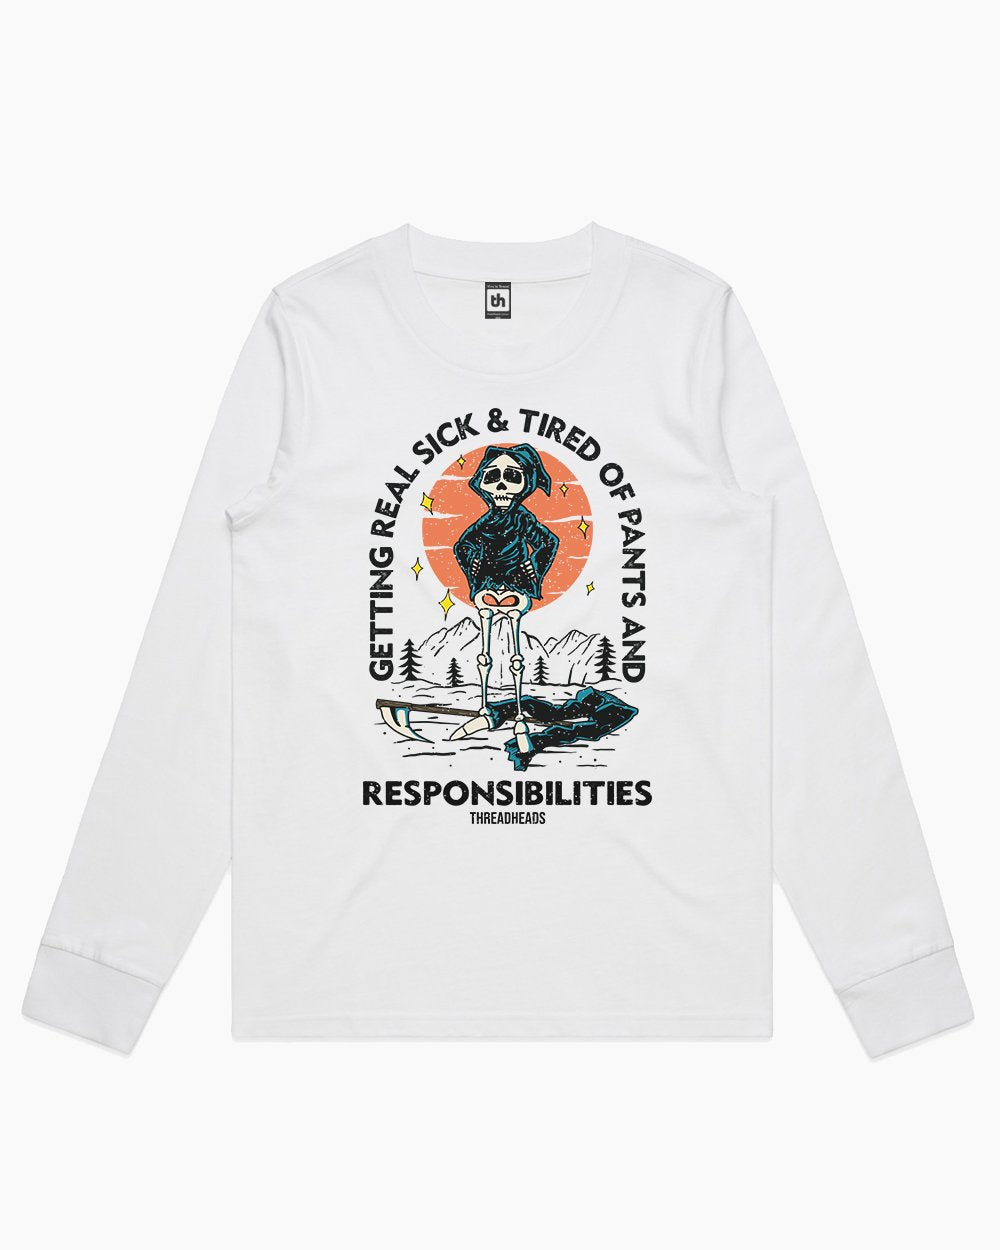 Pants and Responsibilities Long Sleeve Australia Online #colour_white